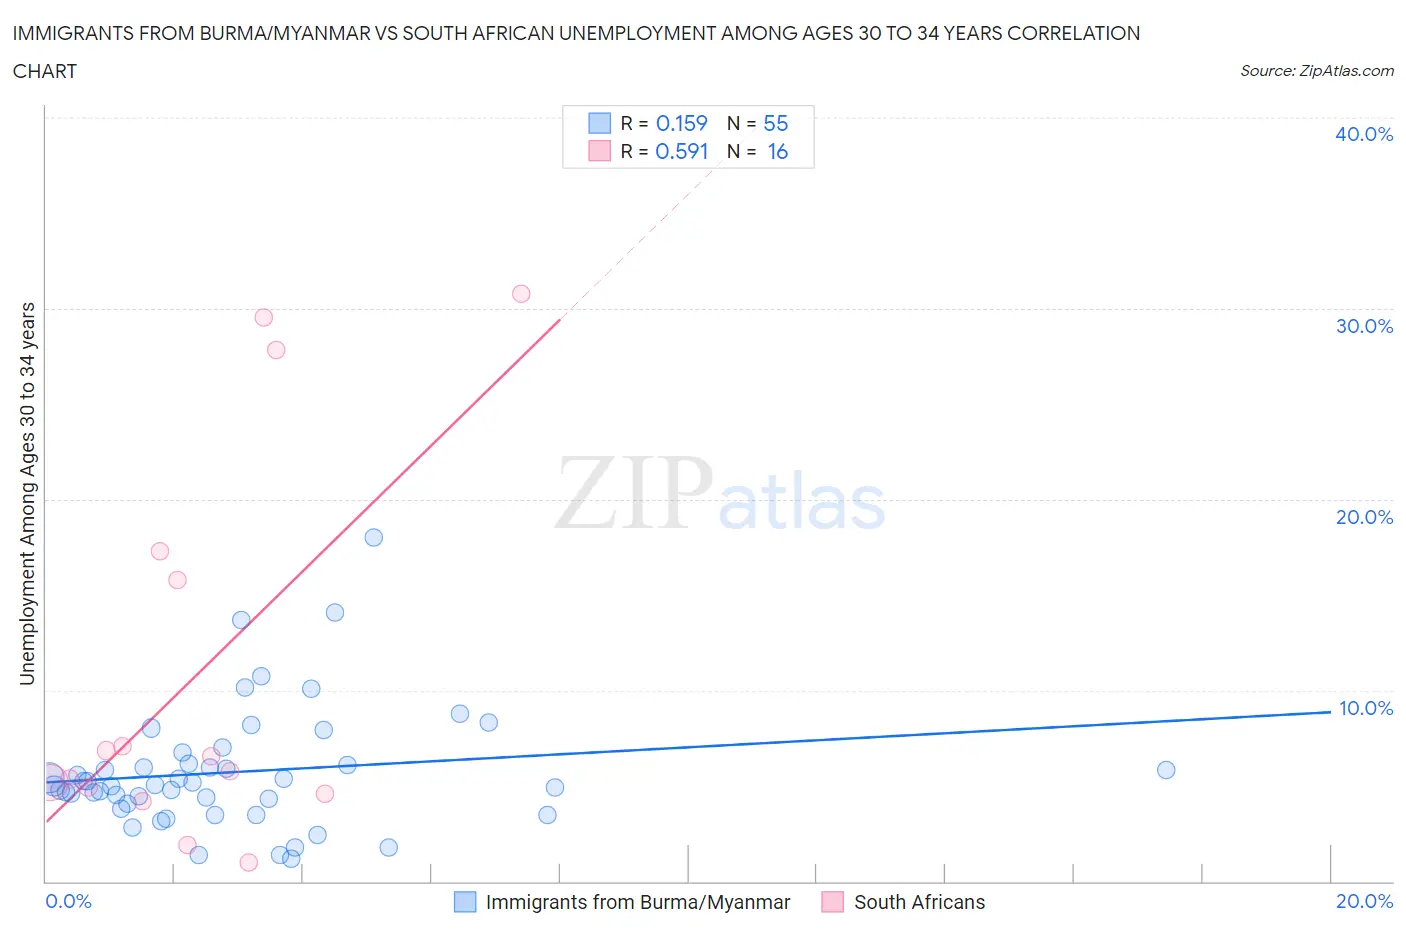 Immigrants from Burma/Myanmar vs South African Unemployment Among Ages 30 to 34 years